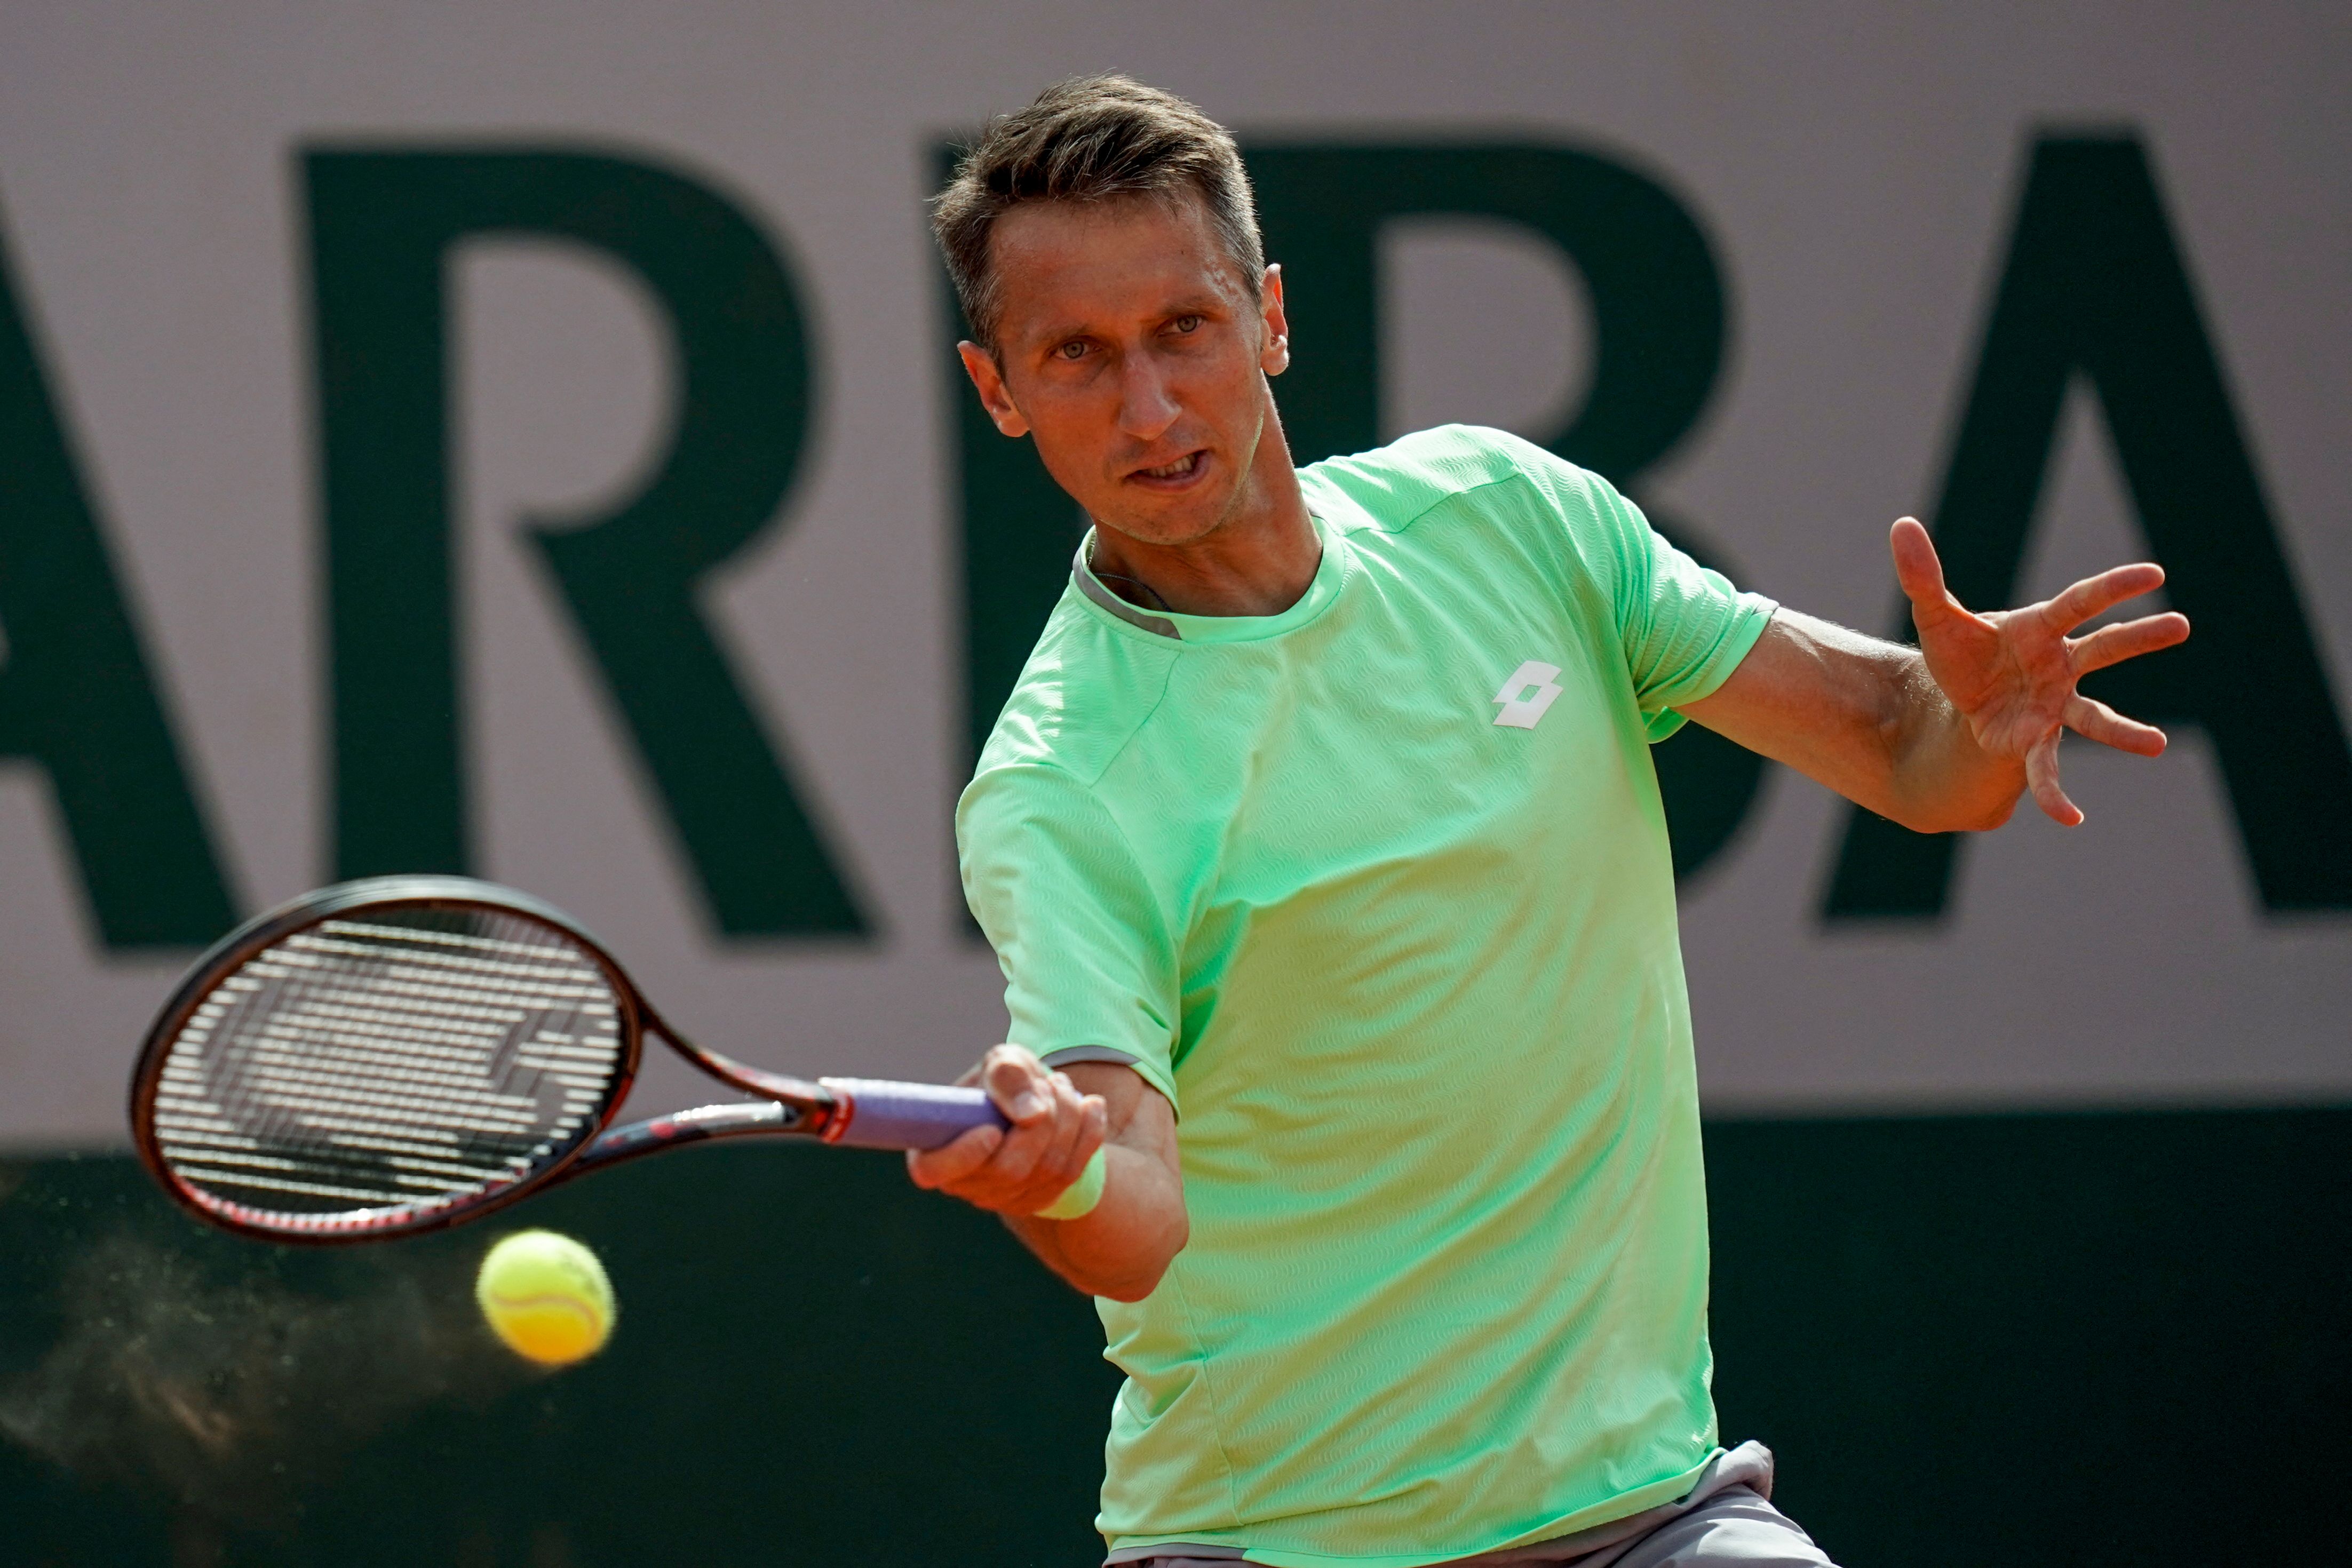 Ukraine's Sergiy Stakhovsky at the Roland Garros 2019 French Open tennis tournament in Paris on May 27, 2019. 